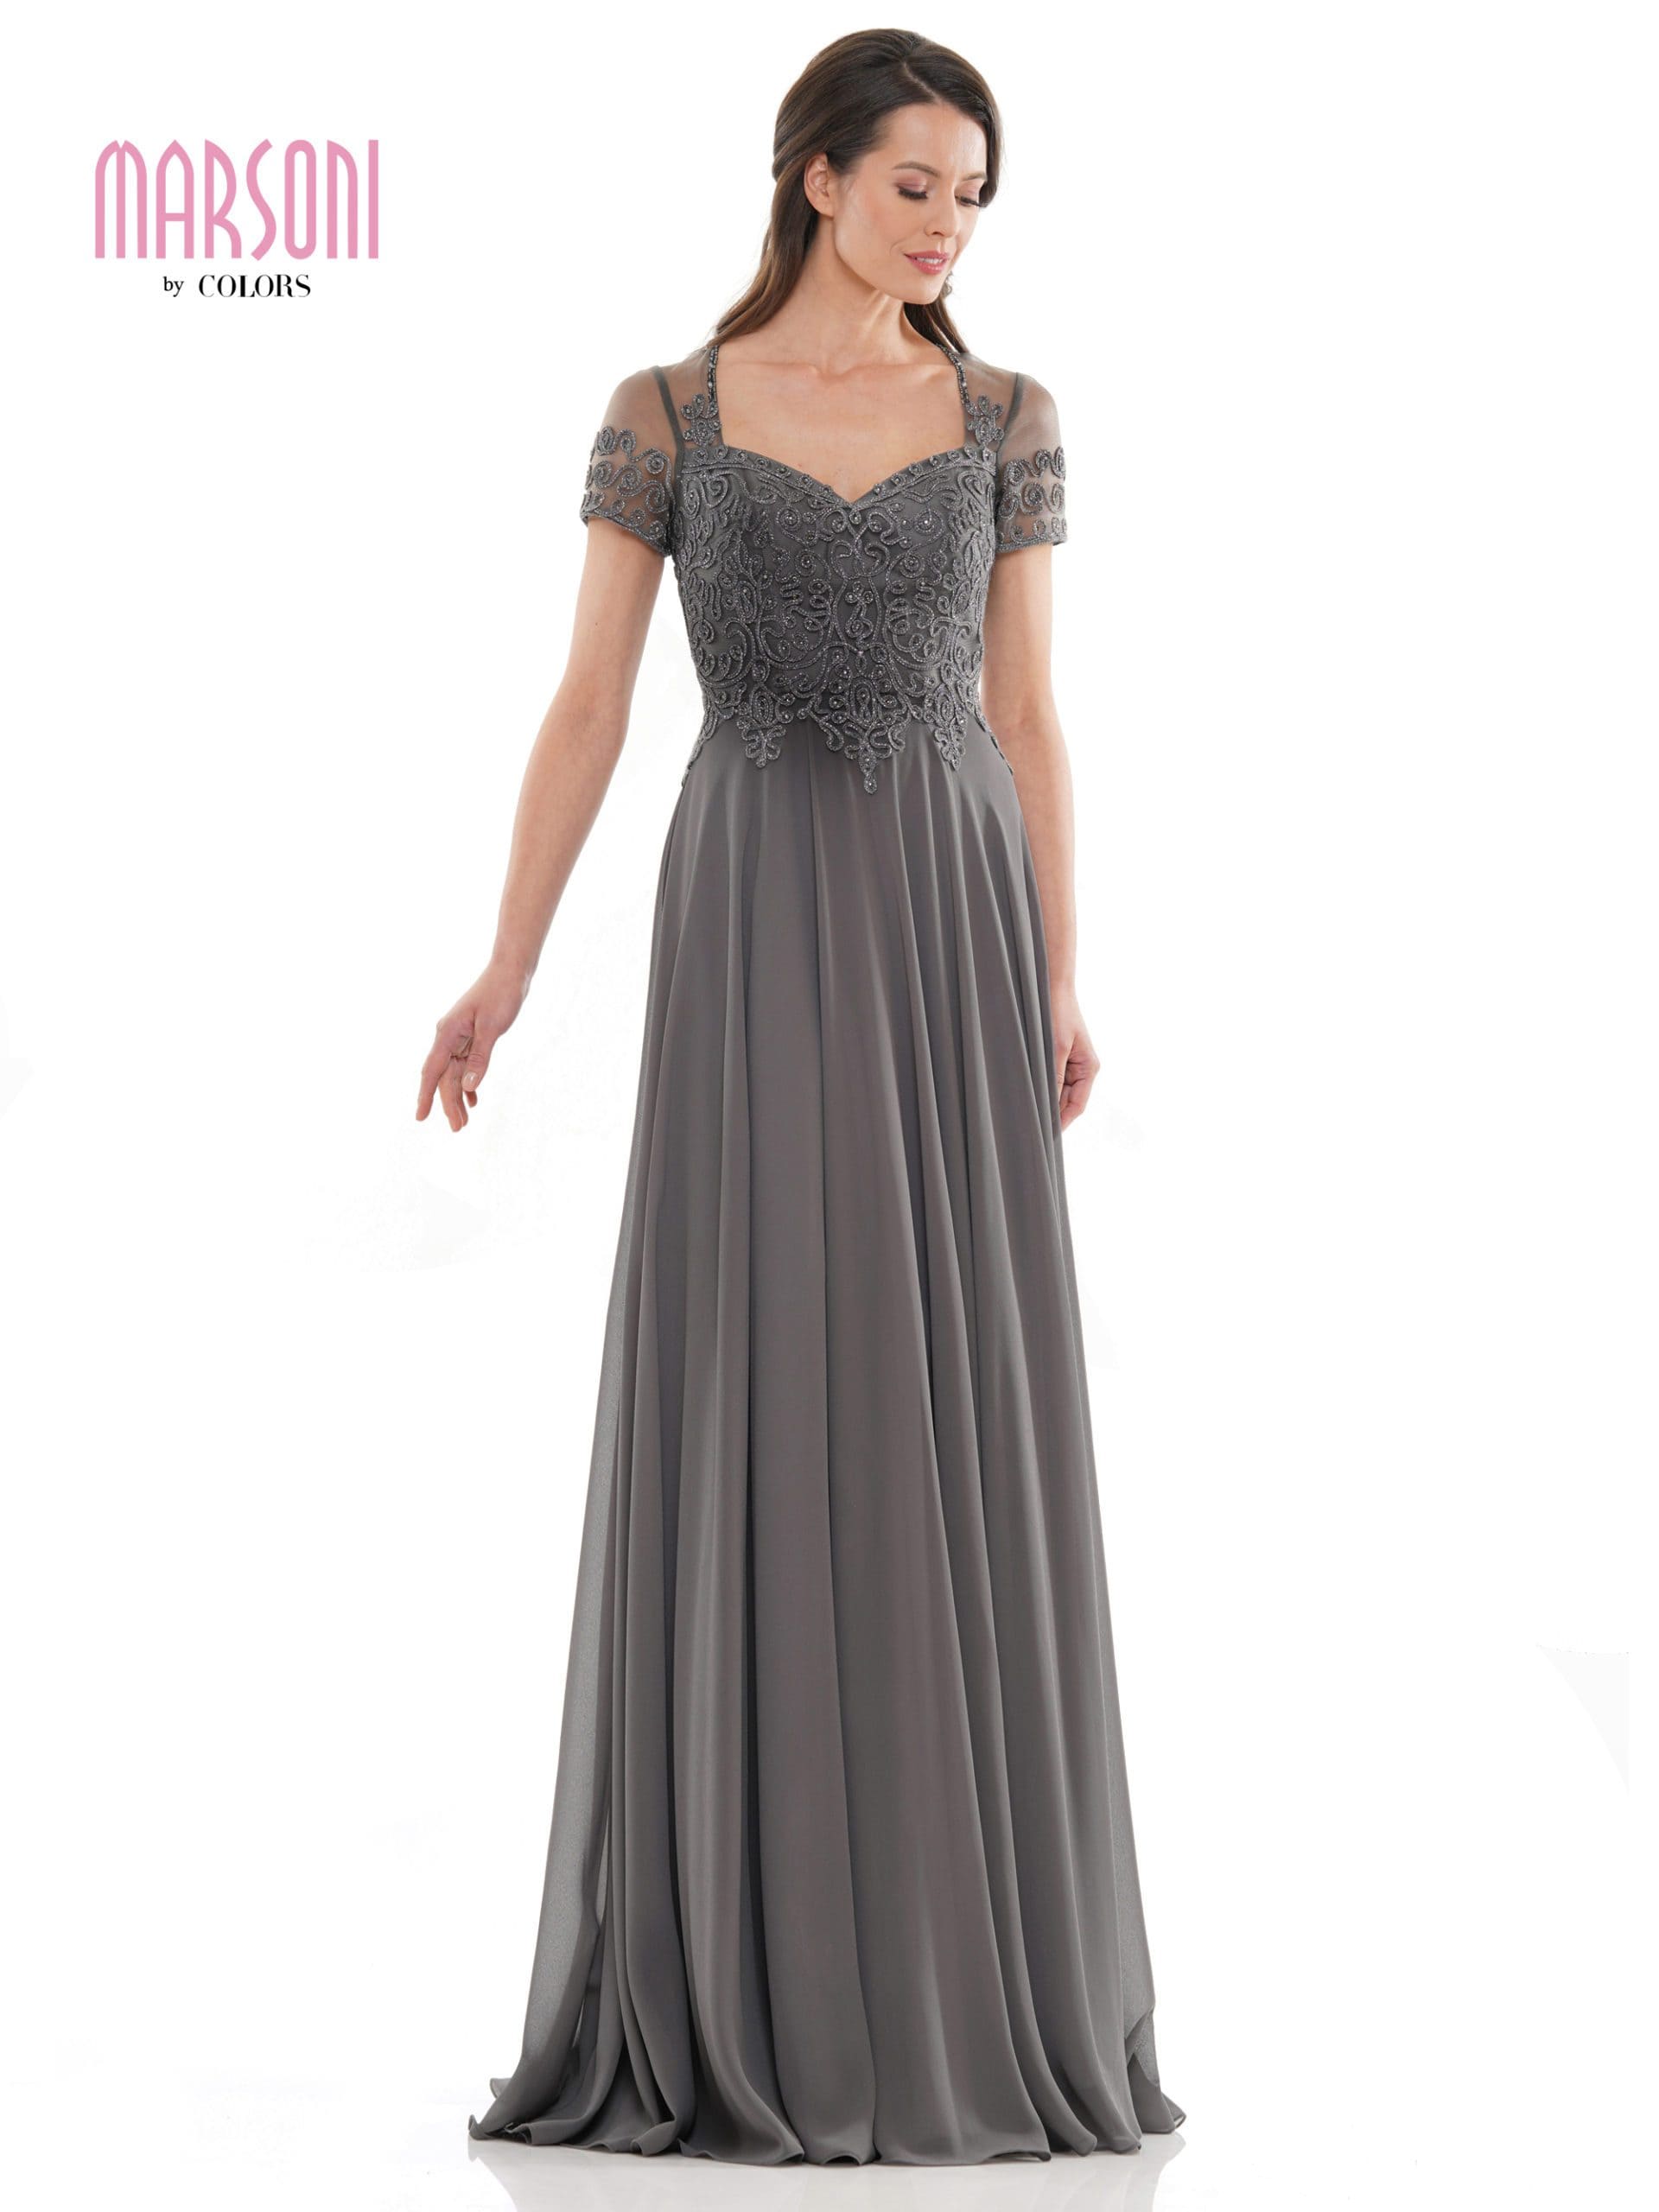 Image of Marsoni by Colors - M271 Short Sleeve Queen Anne Soutache Gown